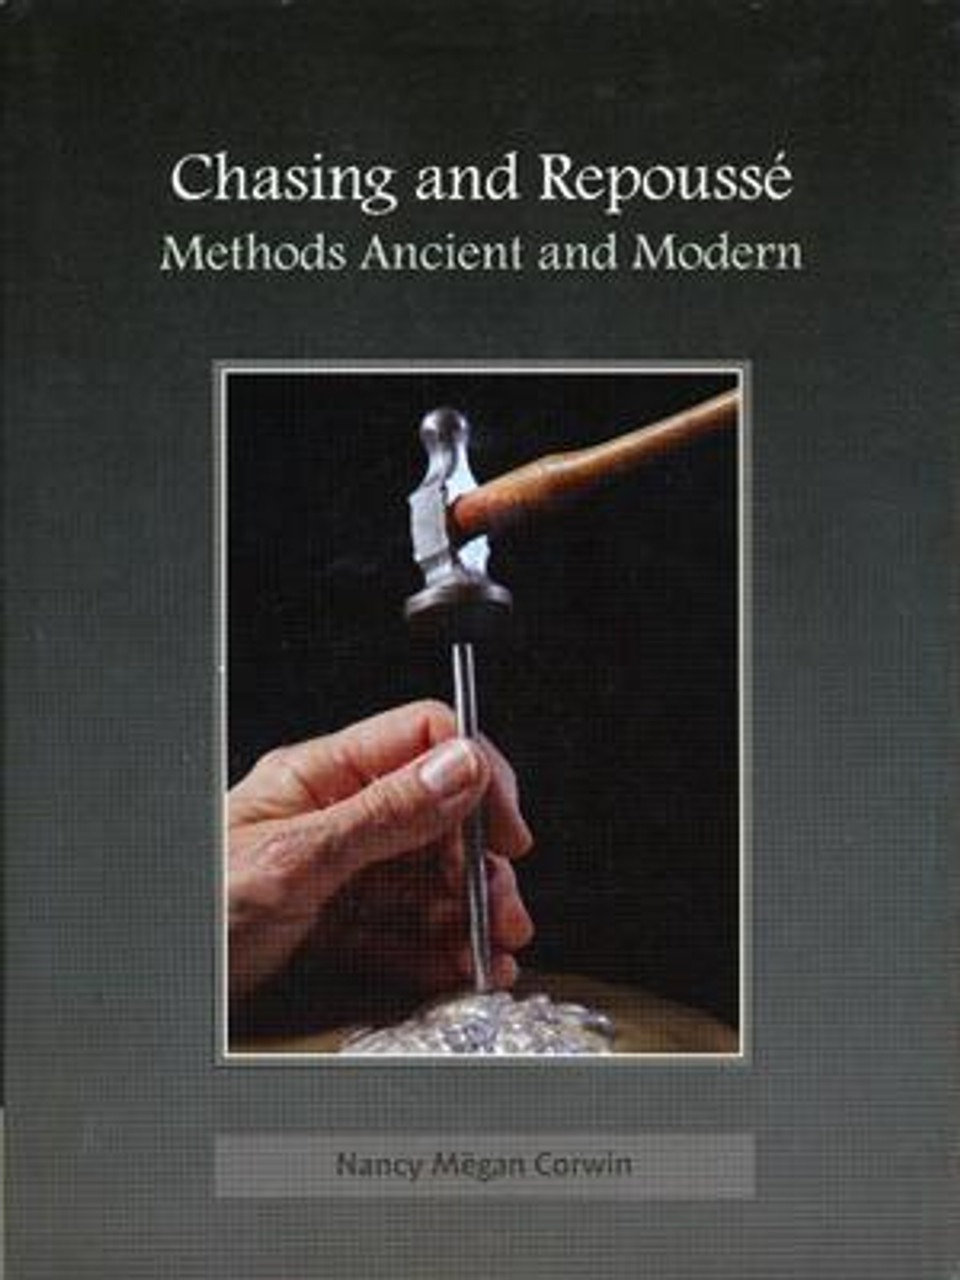 Chasing & Repousse: Methods Ancient and Modern by Nancy Megan Corwin